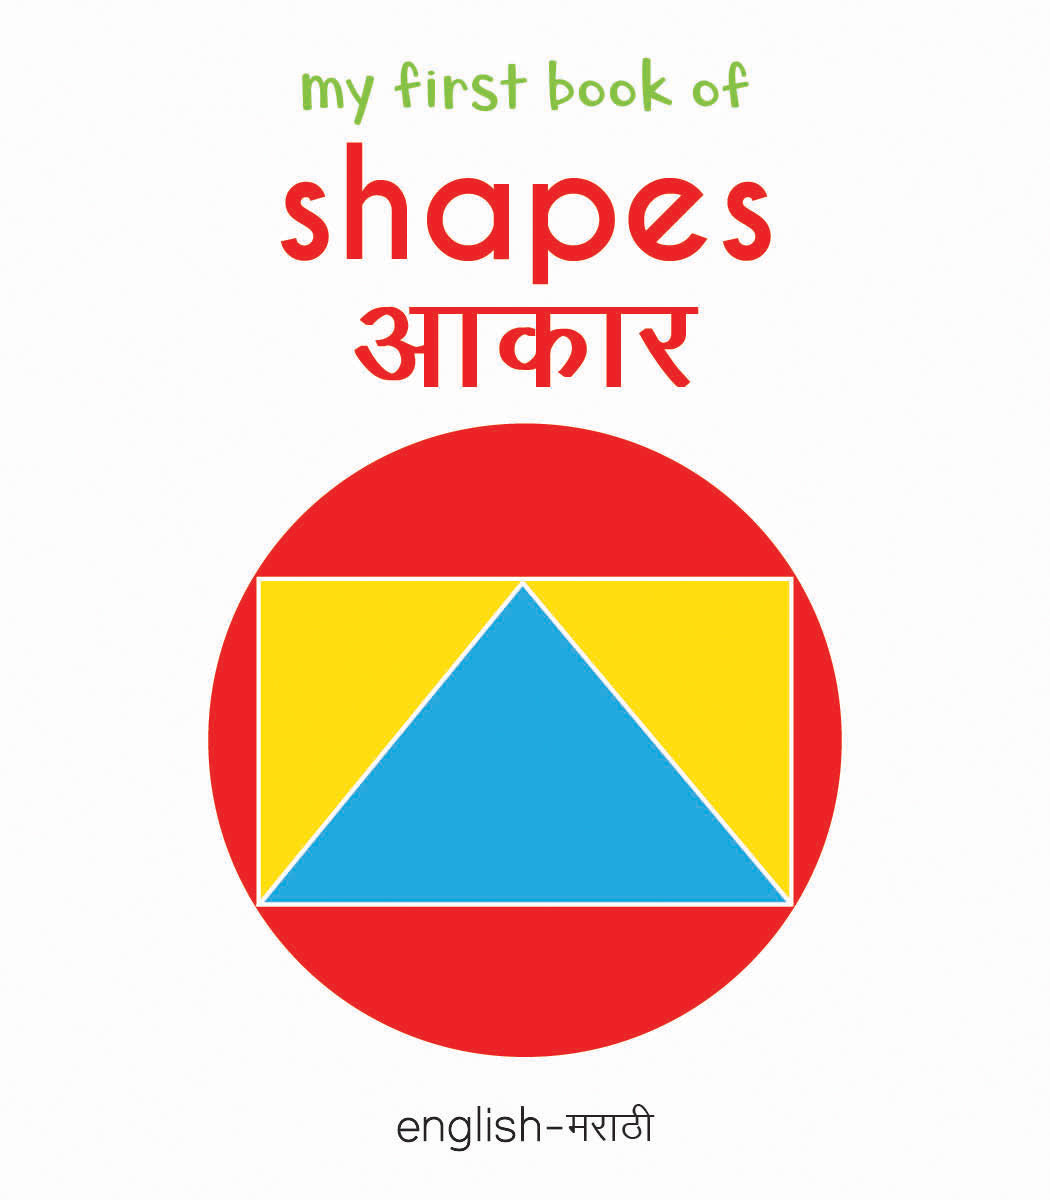 My First Book of Shapes - Aakaar : My First English Marathi Board Book